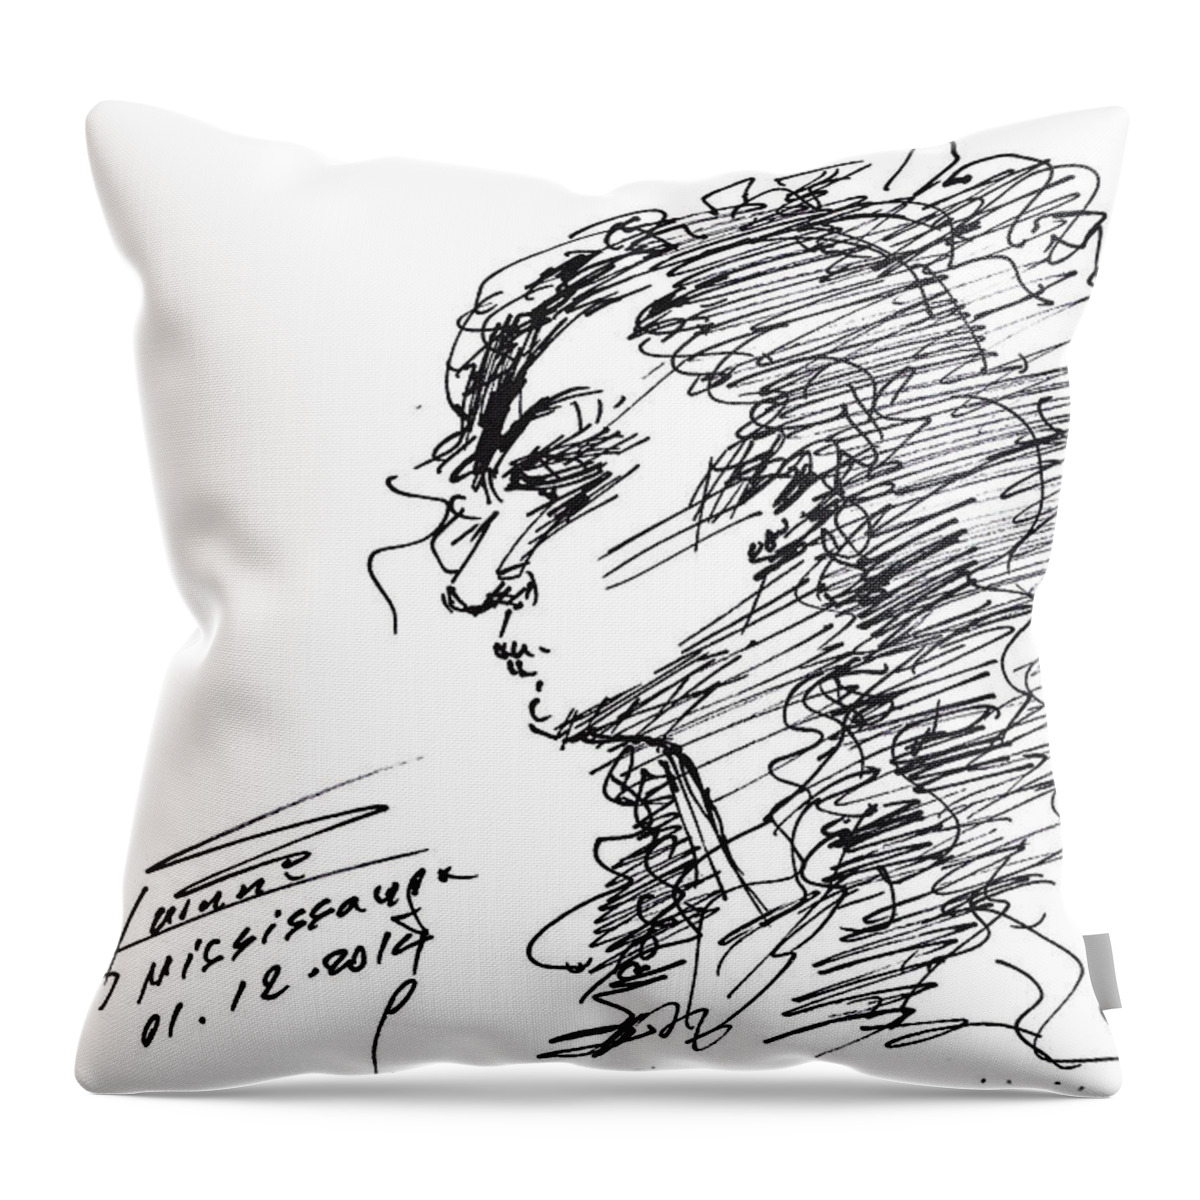 Sketch Throw Pillow featuring the drawing Erbi by Ylli Haruni